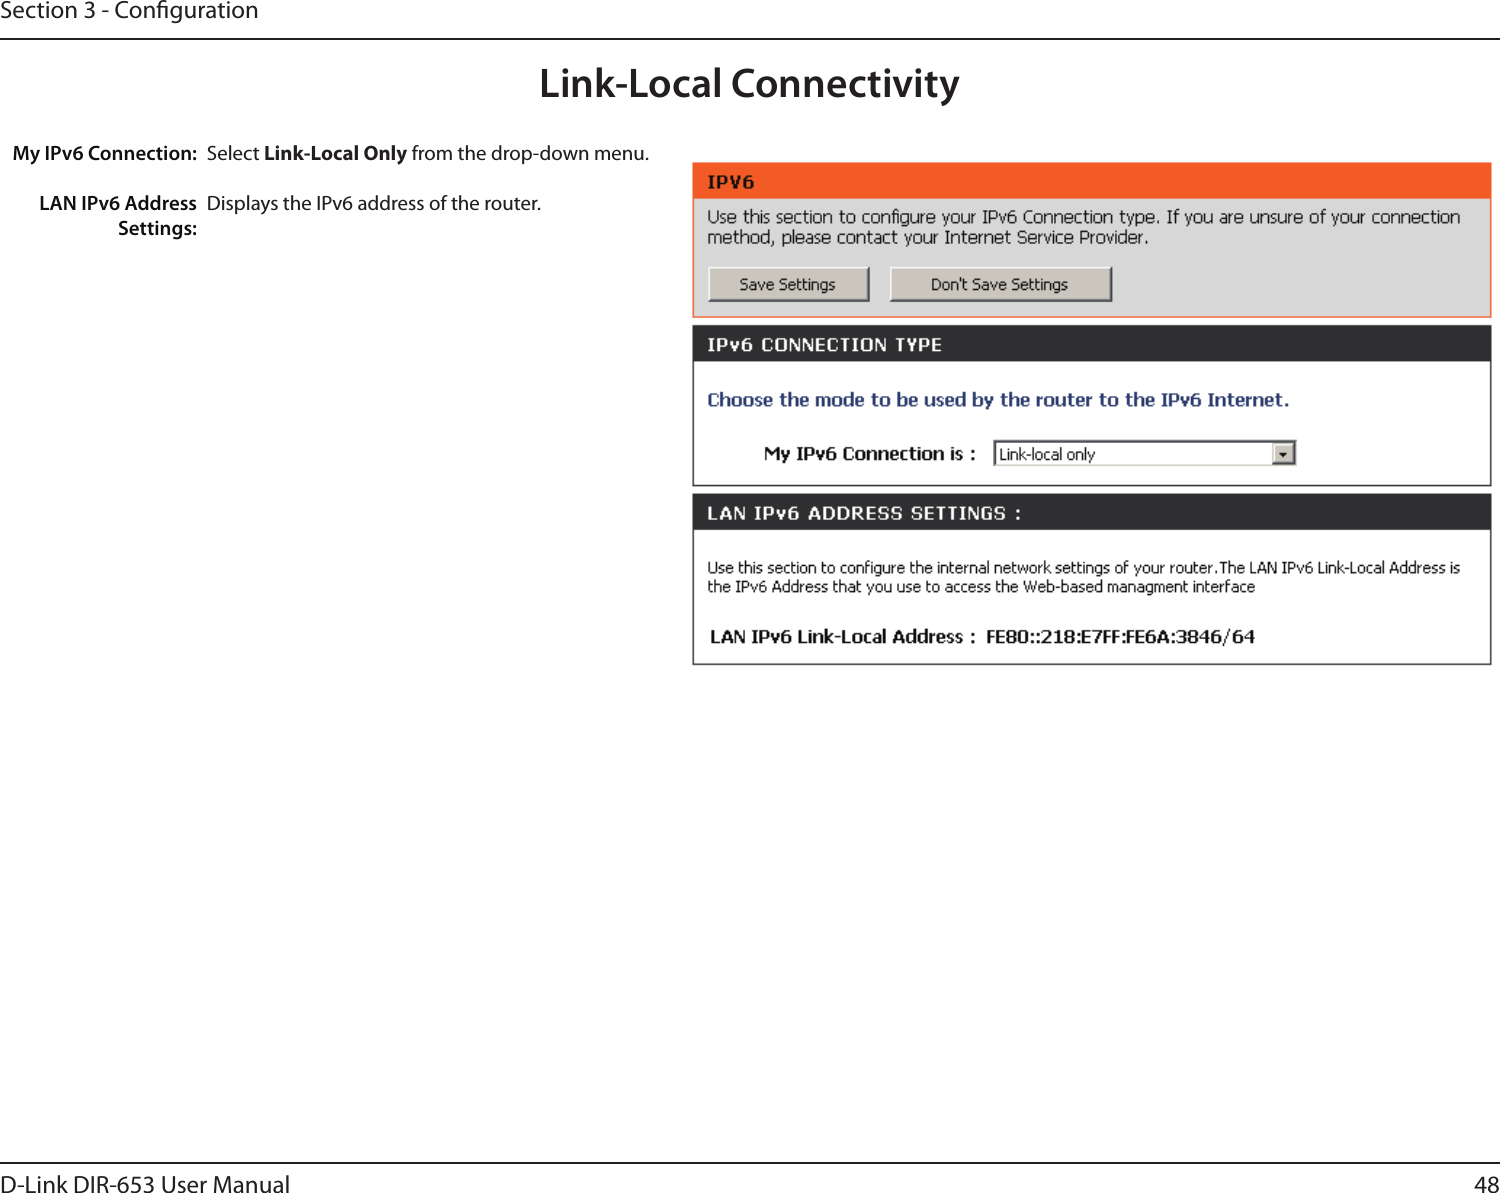 48D-Link DIR-653 User ManualSection 3 - CongurationSelect Link-Local Only from the drop-down menu.Displays the IPv6 address of the router.My IPv6 Connection:LAN IPv6 Address Settings:Link-Local Connectivity